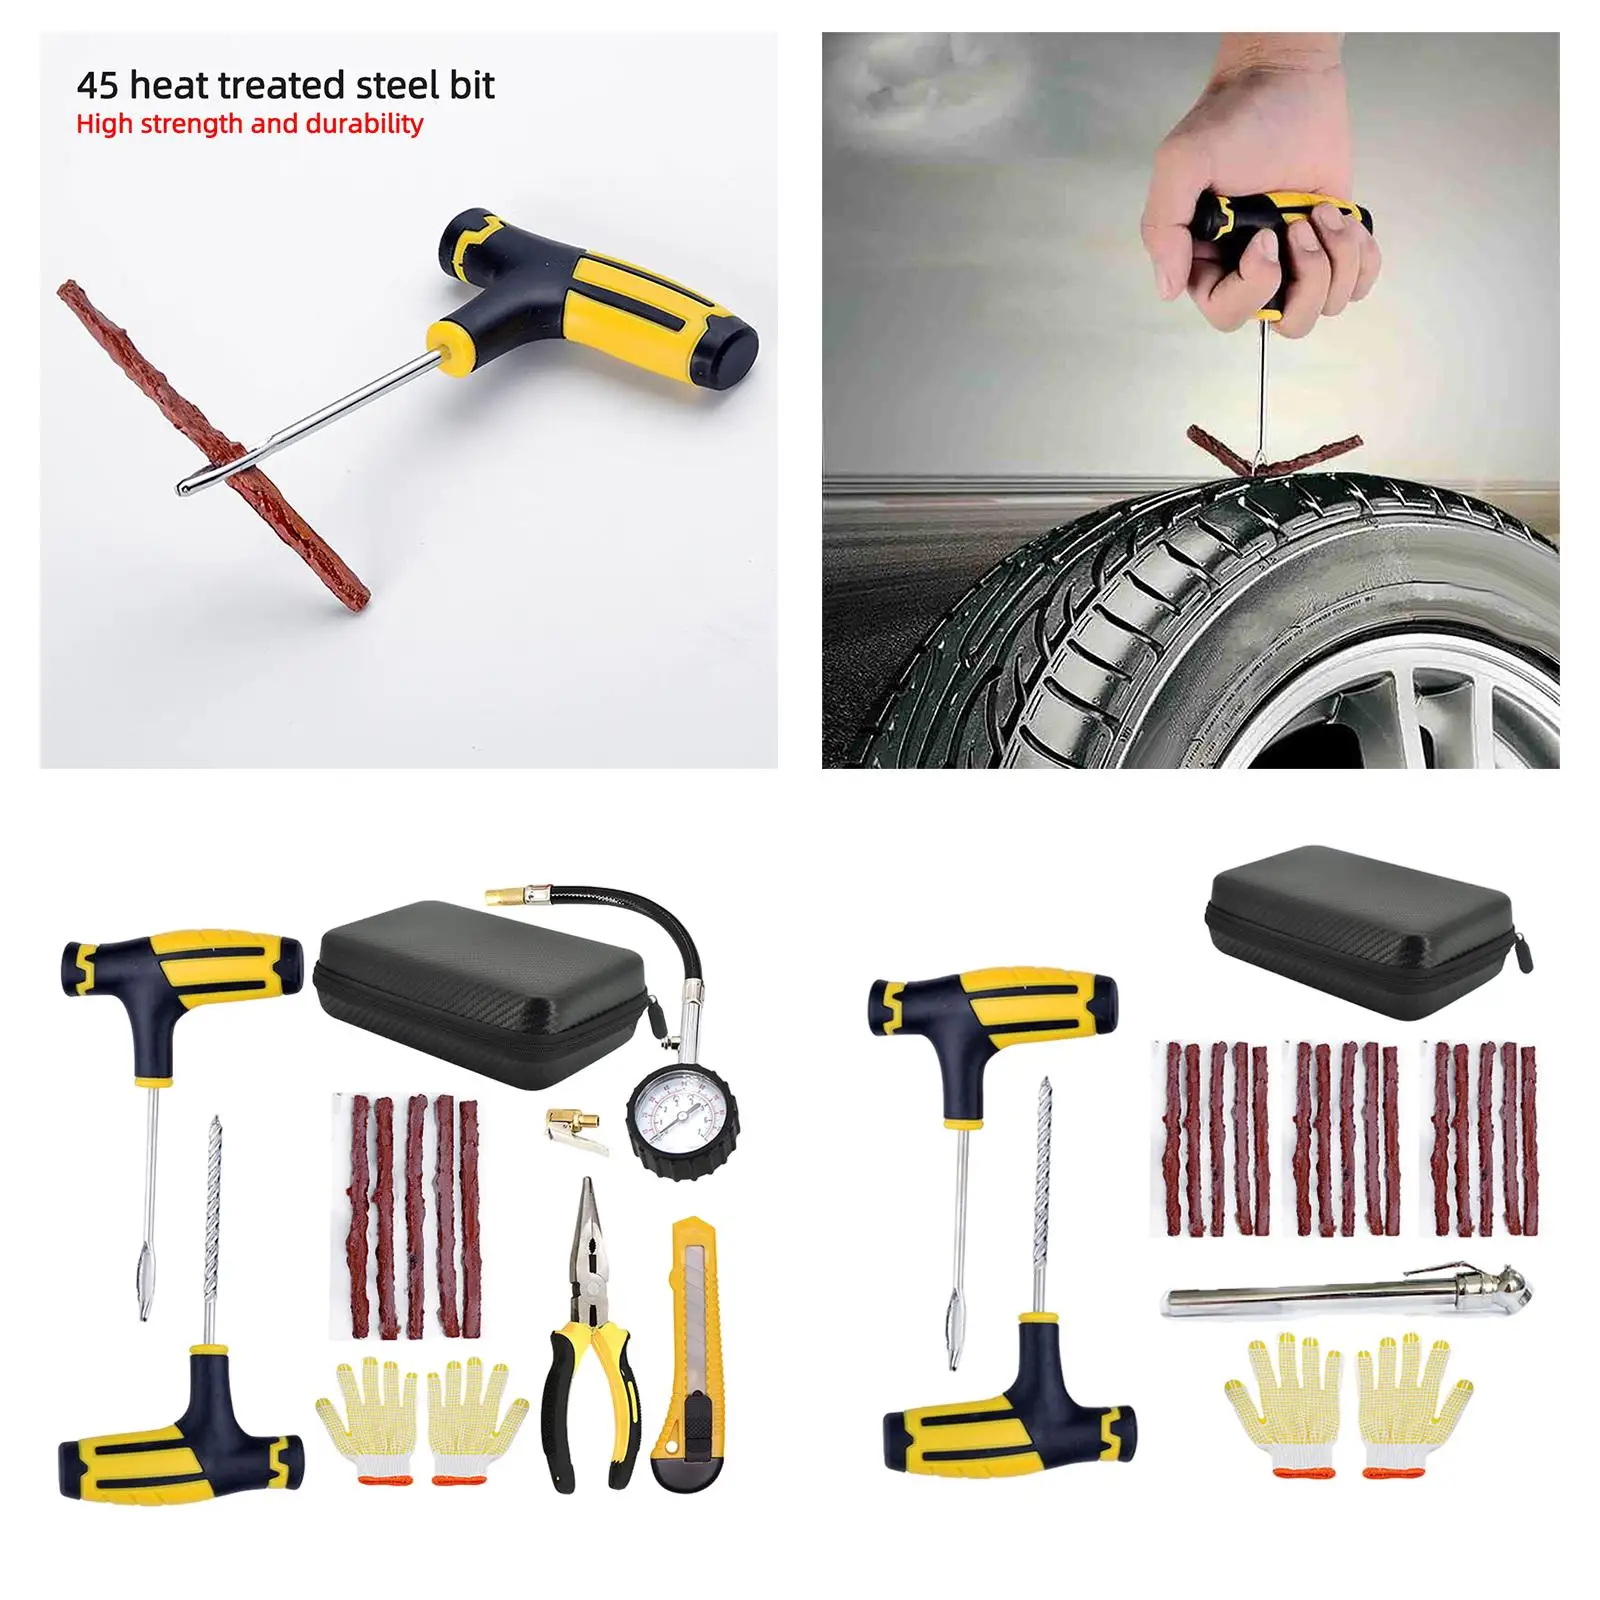 Tire Repair Tools Kit Tubeless Tyre with Rubber Strips Puncture Repair Kit for Car Bike Van with Storage Case Tire Accessories